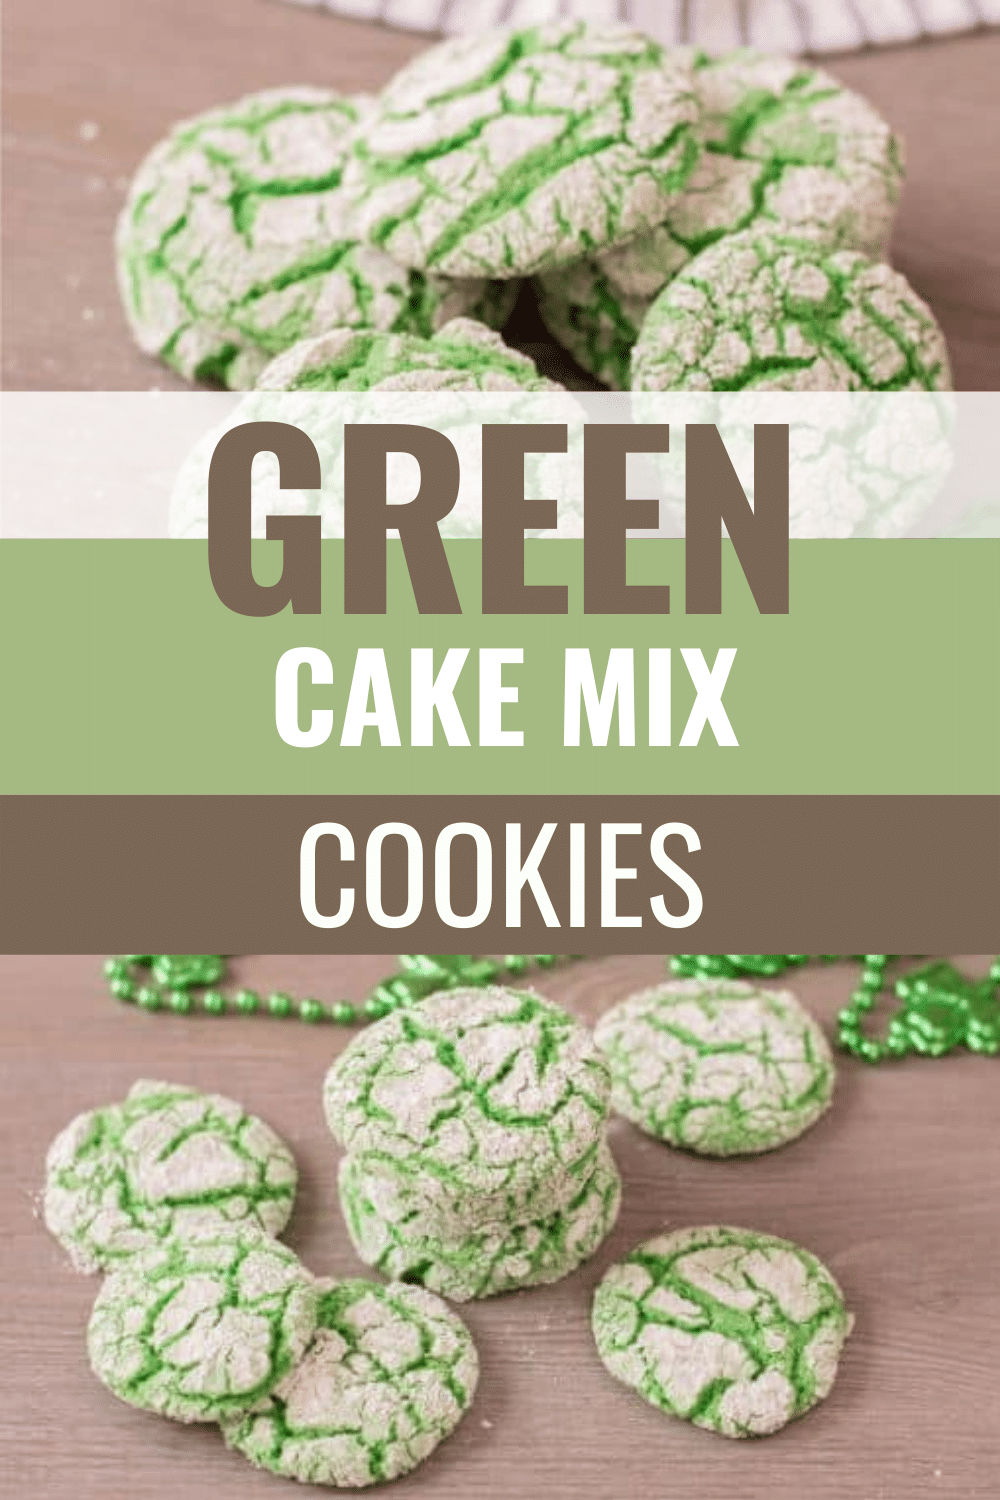 These Green Cake Mix Cookies make a festive addition to celebrations like Dr. Seuss Day, St. Patrick's Day and Christmas. The best part is you can keep the ingredients on hand so you can whip them up easily. #greencookies #drseuss #stpatricksday #christmas via @wondermomwannab